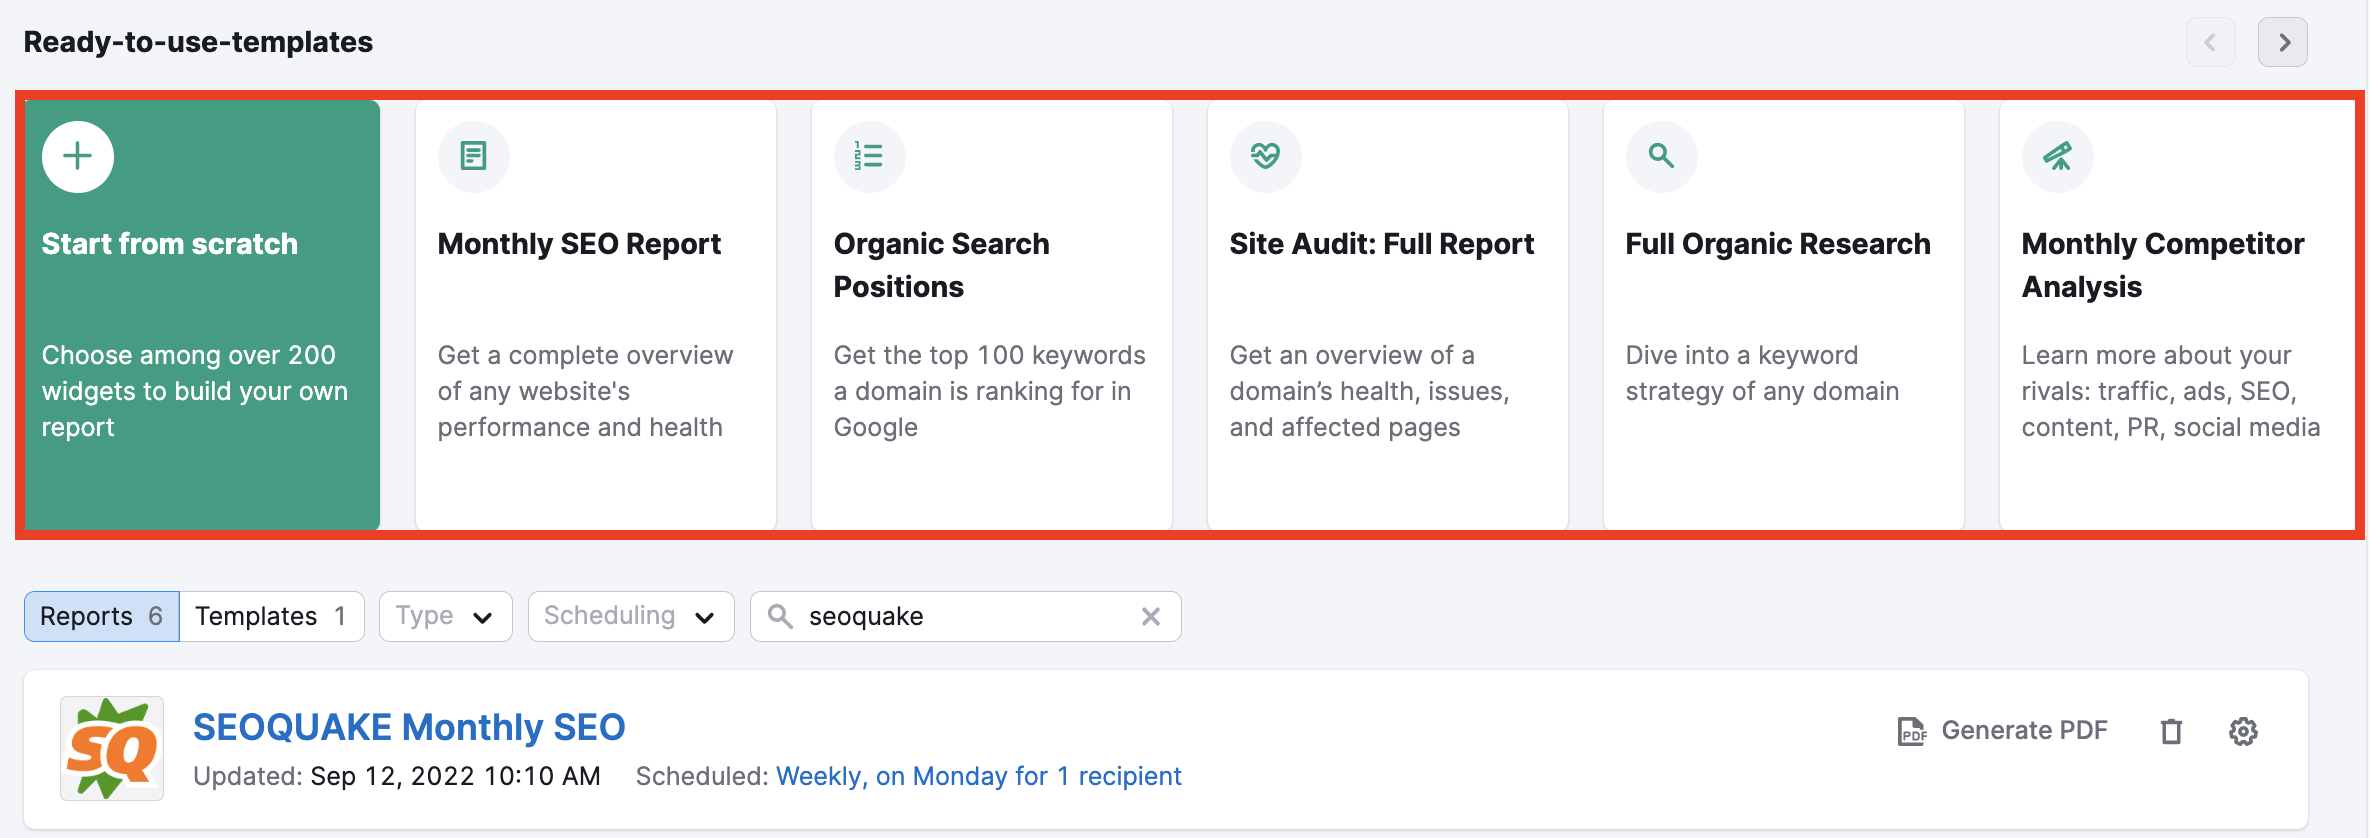 Easy Reporting with Semrush image 6